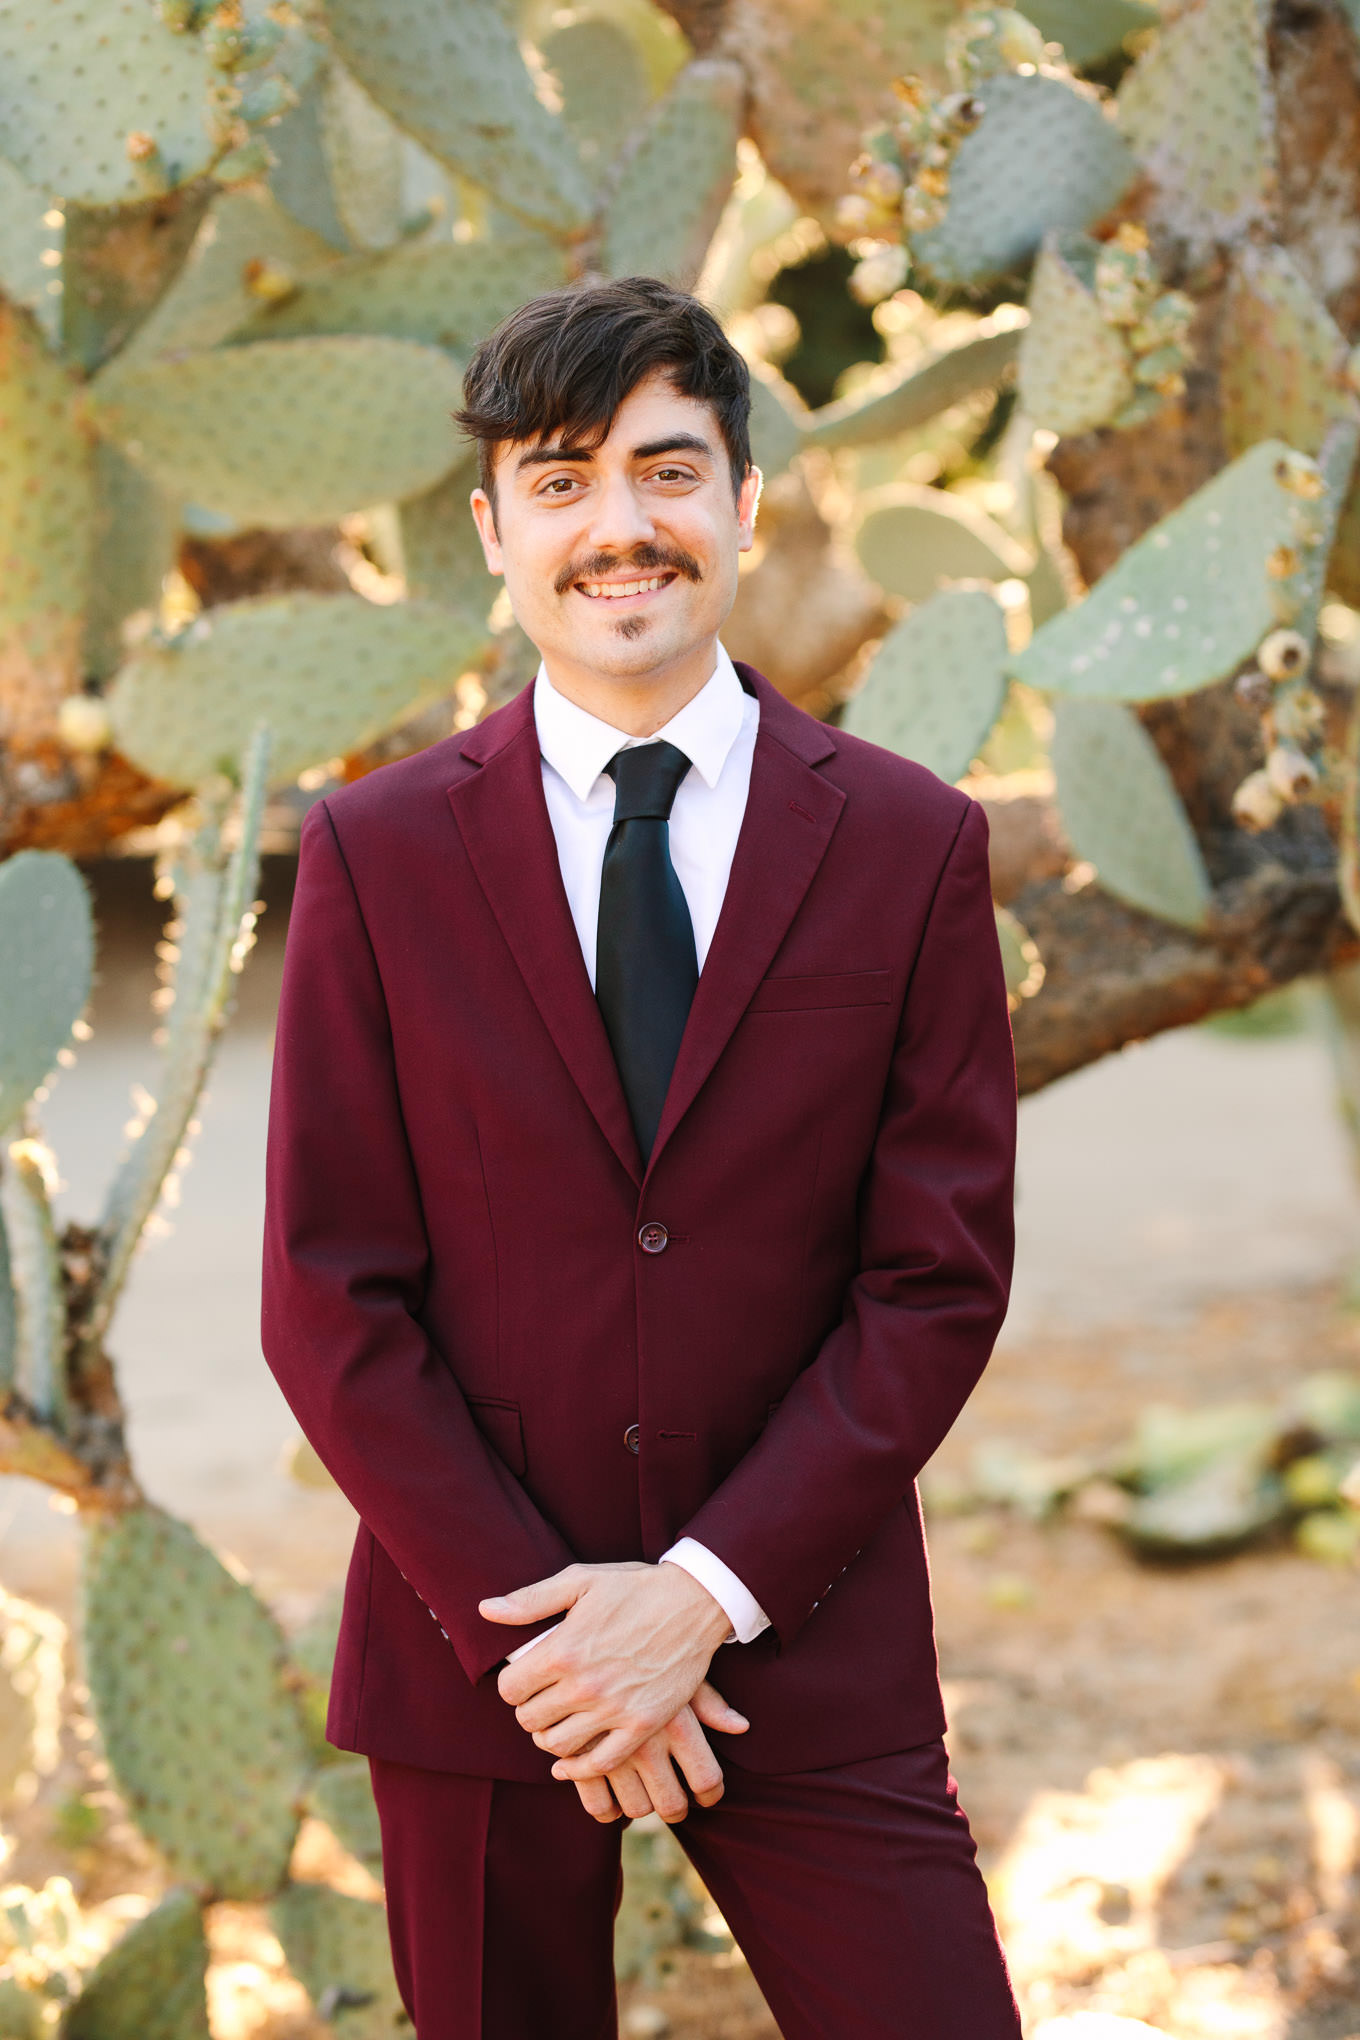 Groom in burgundy suit with black tie | Los Angeles Arboretum Elopement | Colorful and elevated wedding photography for fun-loving couples in Southern California | #LosAngelesElopement #elopement #LAarboretum #LAskyline #elopementphotos   Source: Mary Costa Photography | Los Angeles